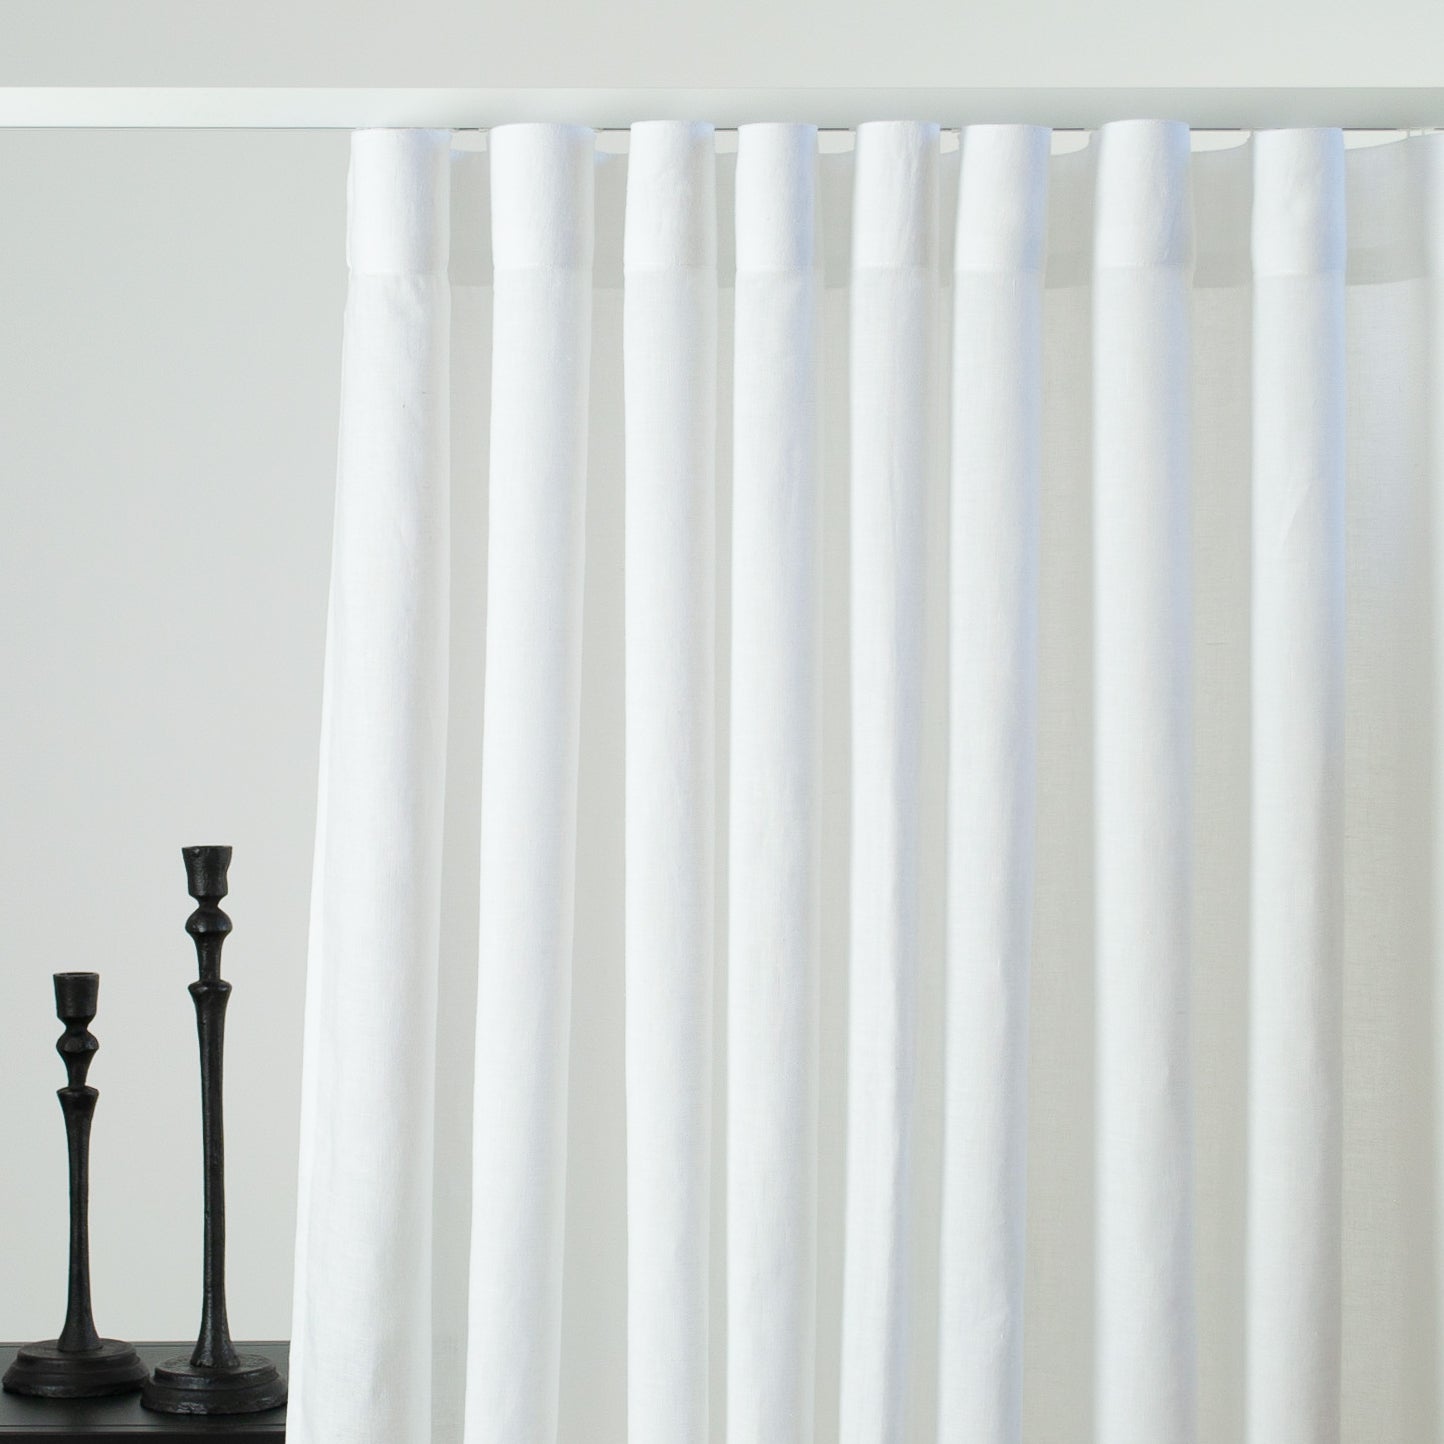 How to measure and hang curtain drapery panels, everything you need to  know! - Superior Custom Linens